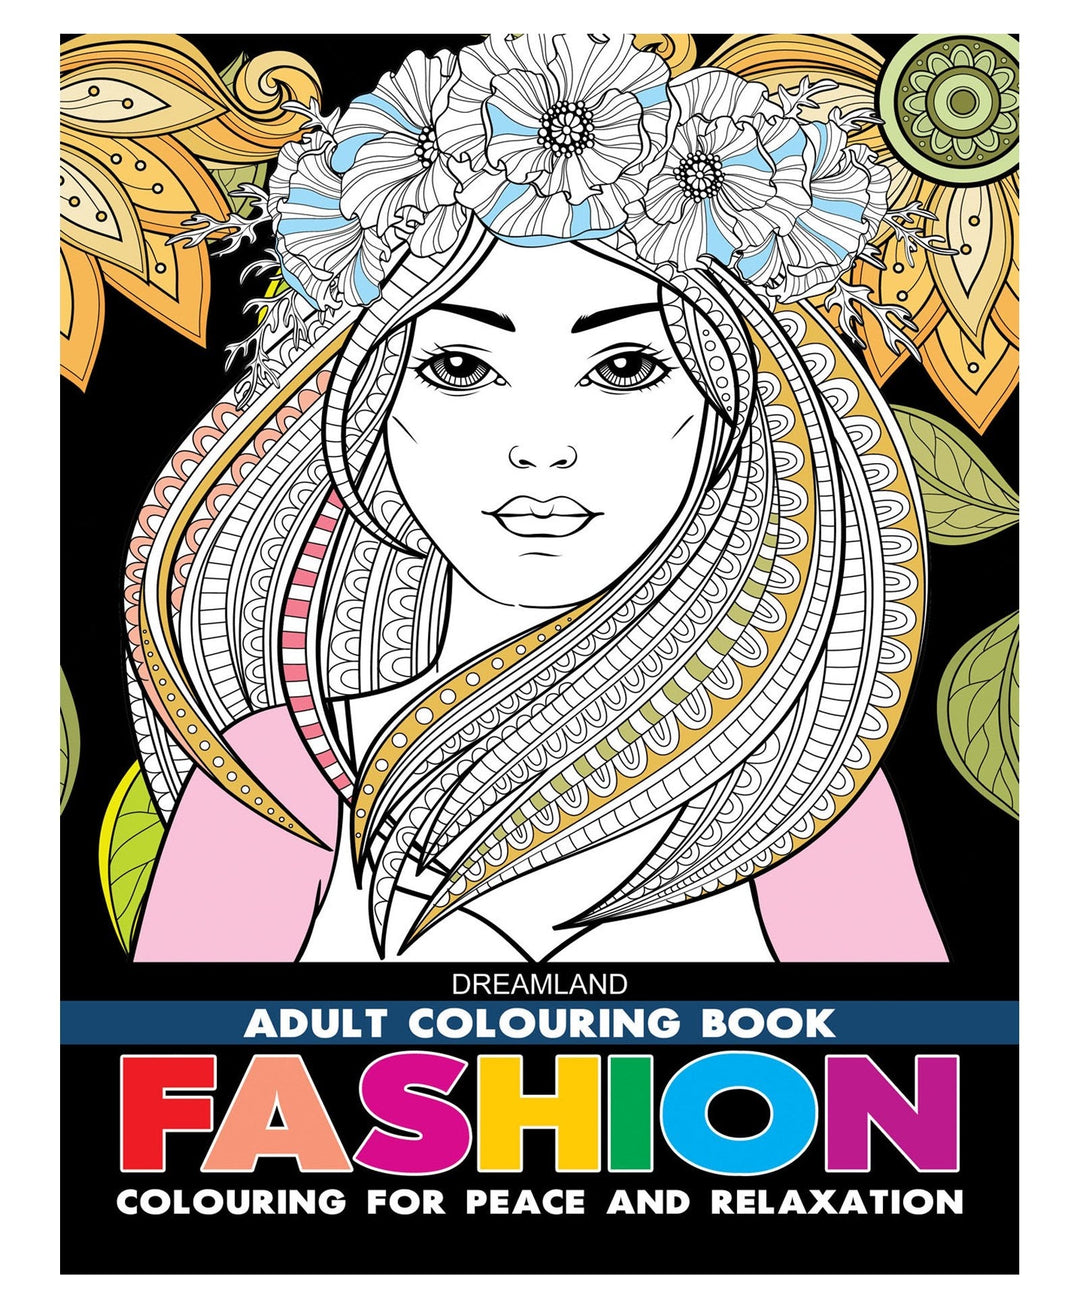 CREATIVE ADULT COLORING BOOKS - Vol. 17: Women Coloring Books for Adults [Book]